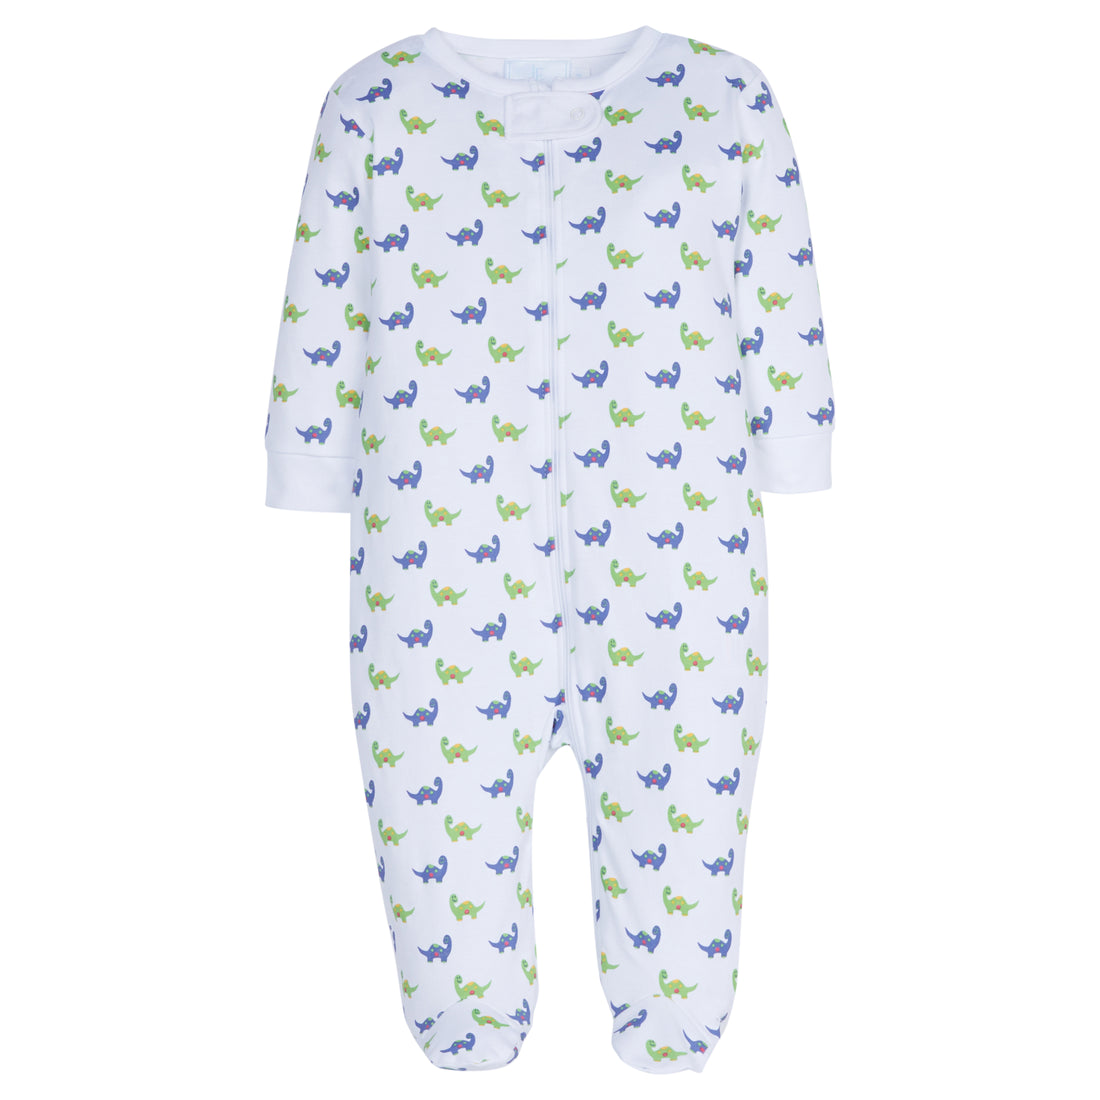 classic childrens clothing boys footie with blue and green dinosaurs, dinosaur print